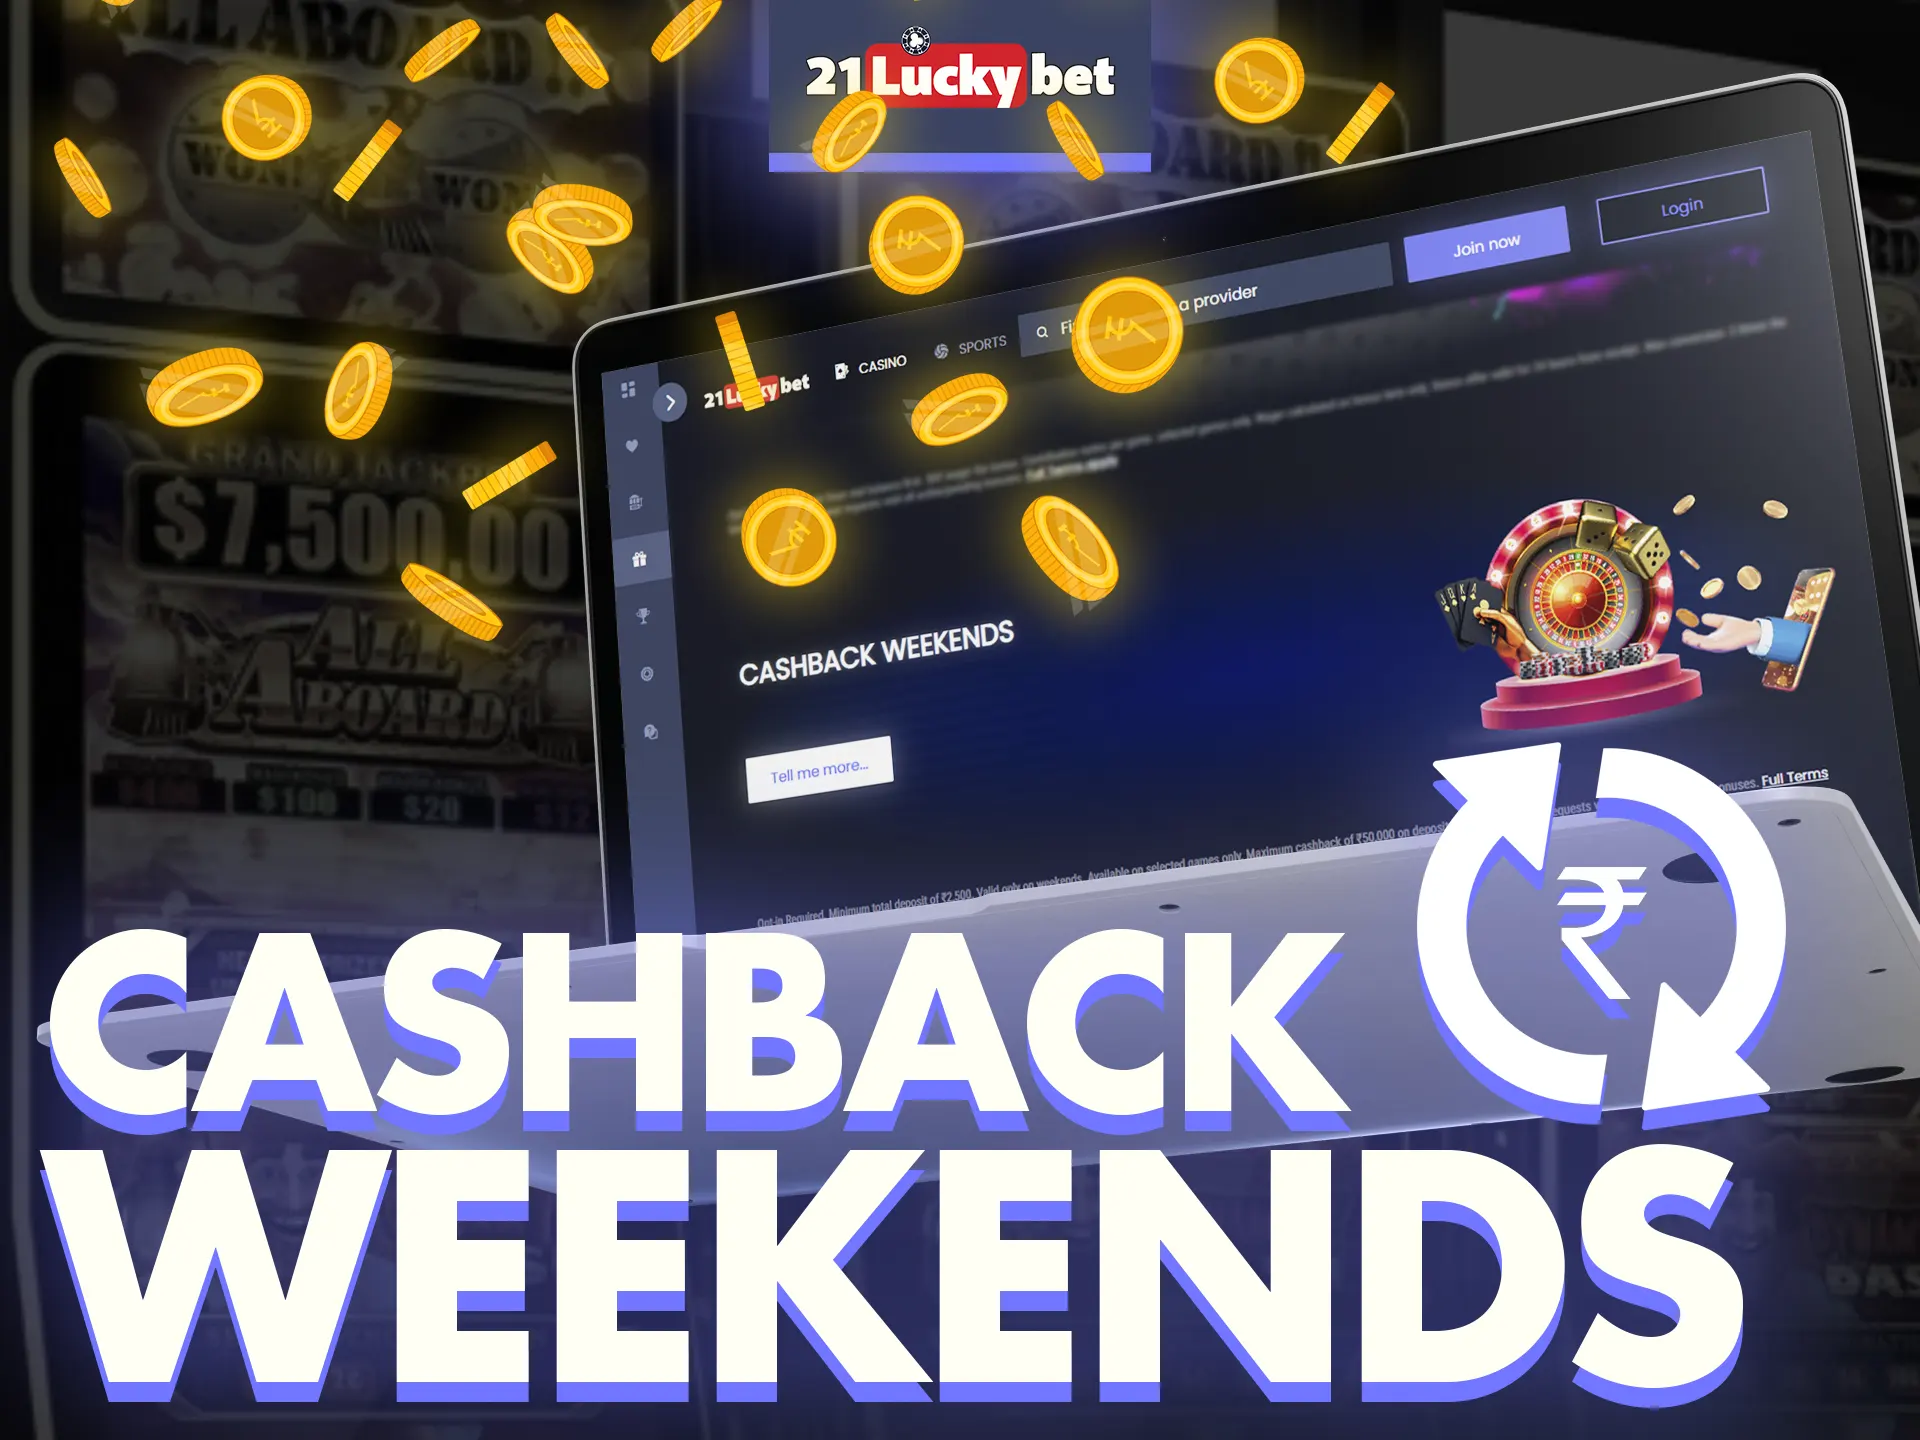 21luckybet has weekends with cashback.